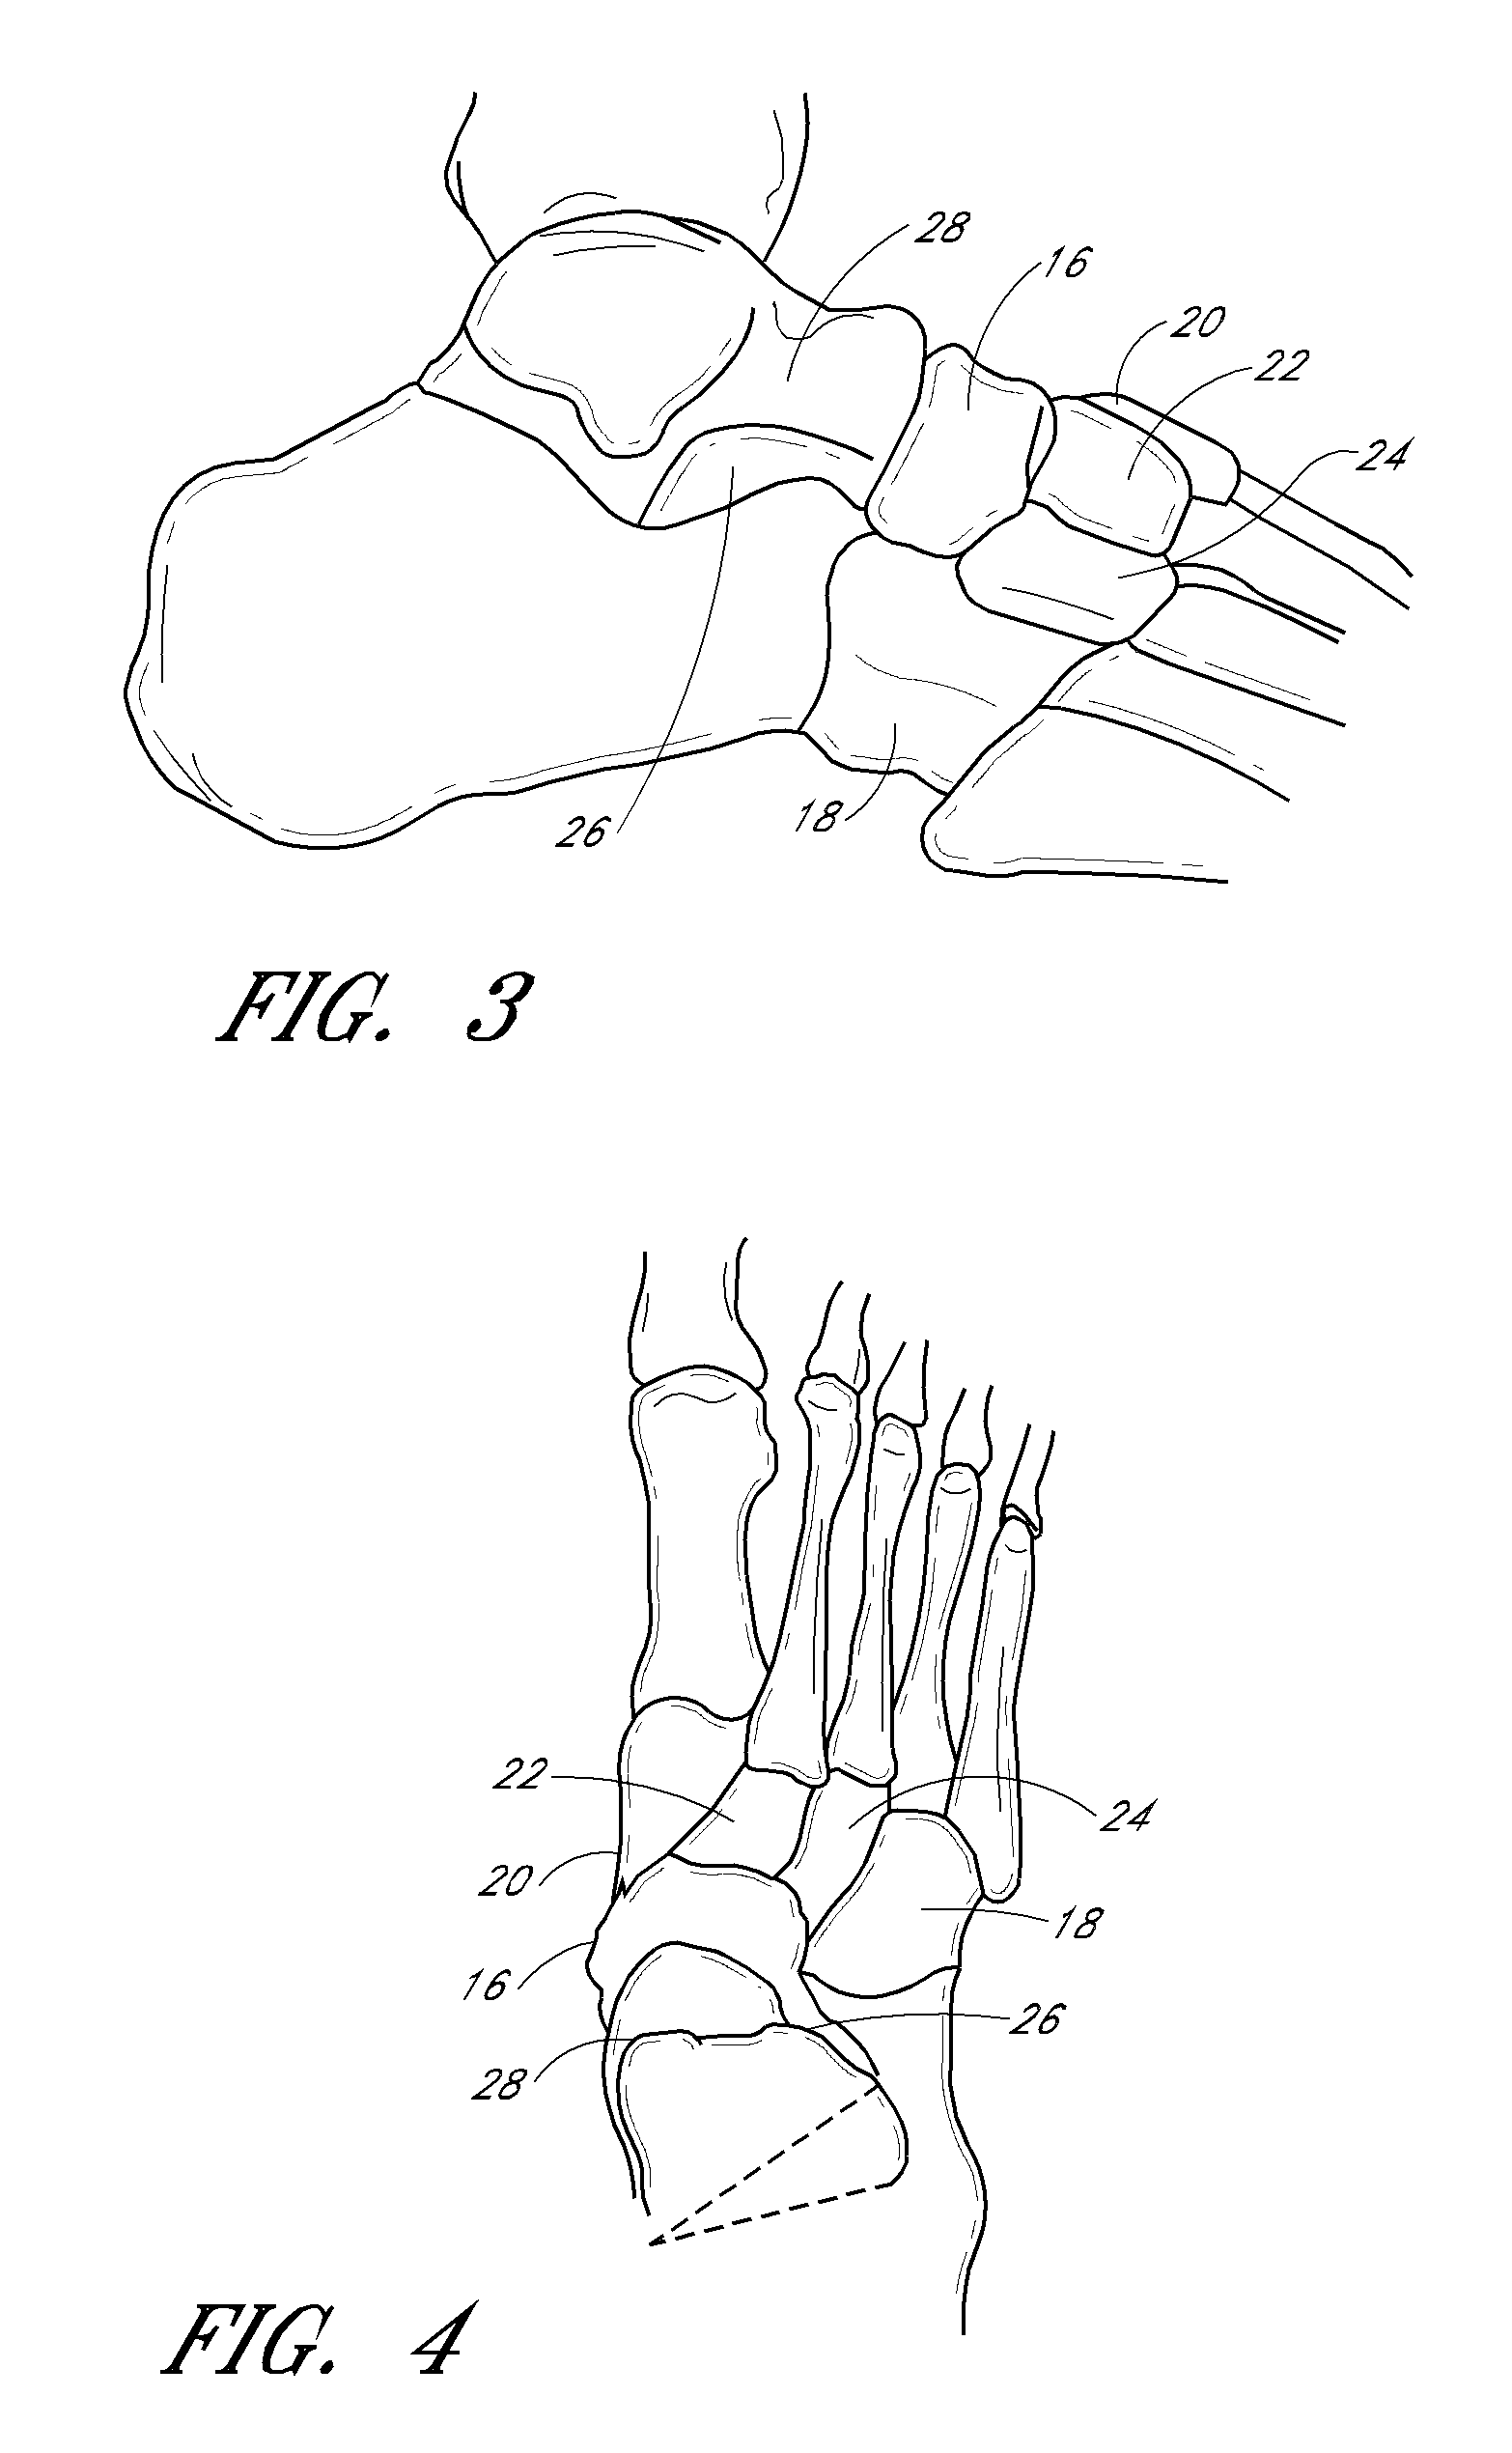 Catheter deliverable foot implant and method of delivering the same